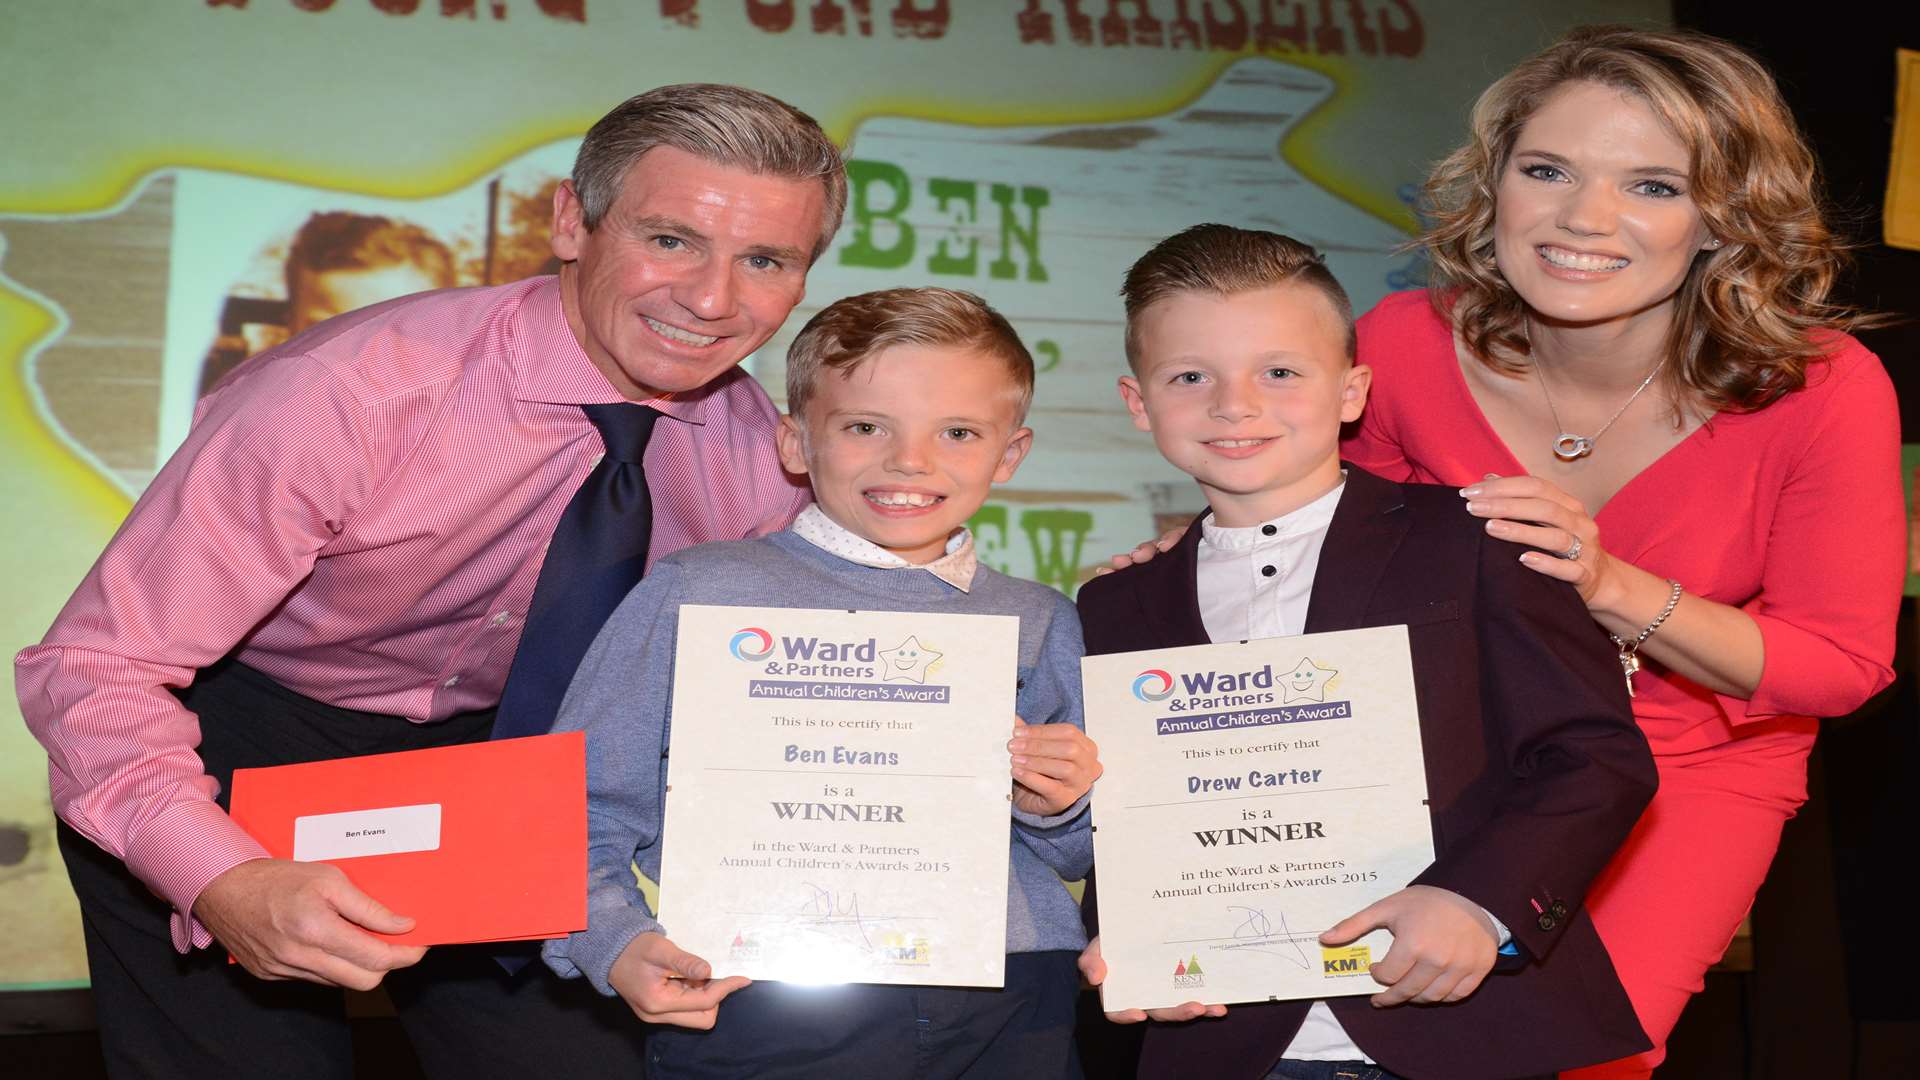 Charlotte Hawkins and Keith Lovell, financial services director for Arun Estates, presenting award to Ben Evans and his best friend Drew Carter